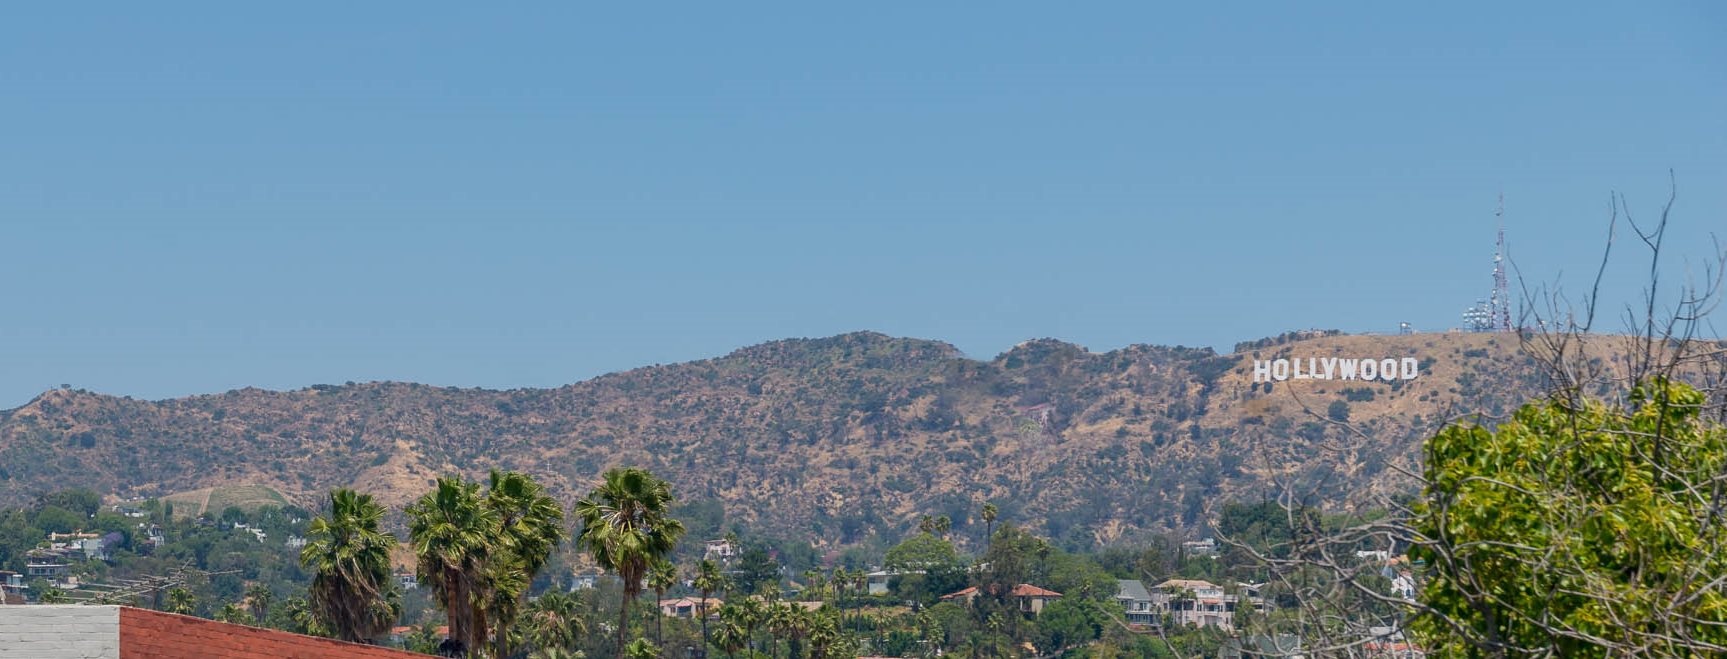 Building view of Hollywood Hills